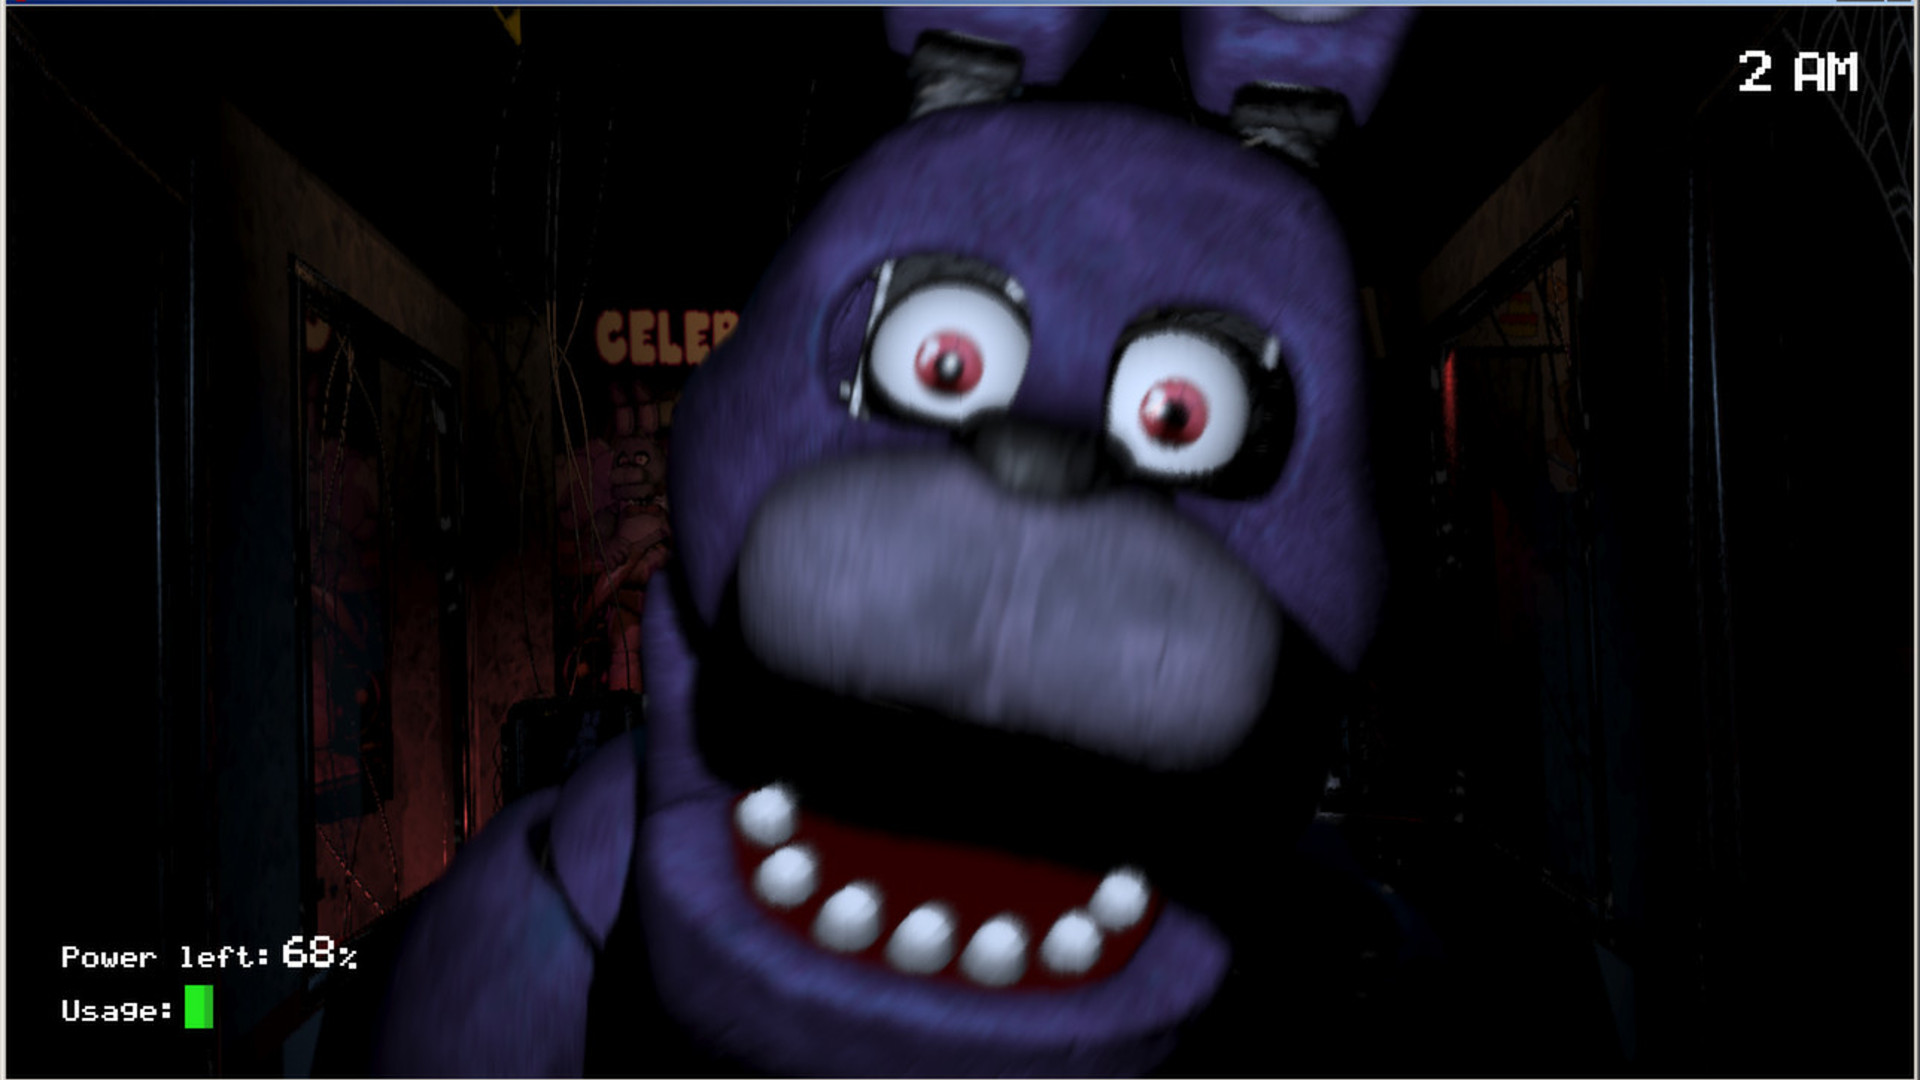 Five Nights At Freddys movie shooting in spring 2021, screenplay “has a great central story” PCGamesN